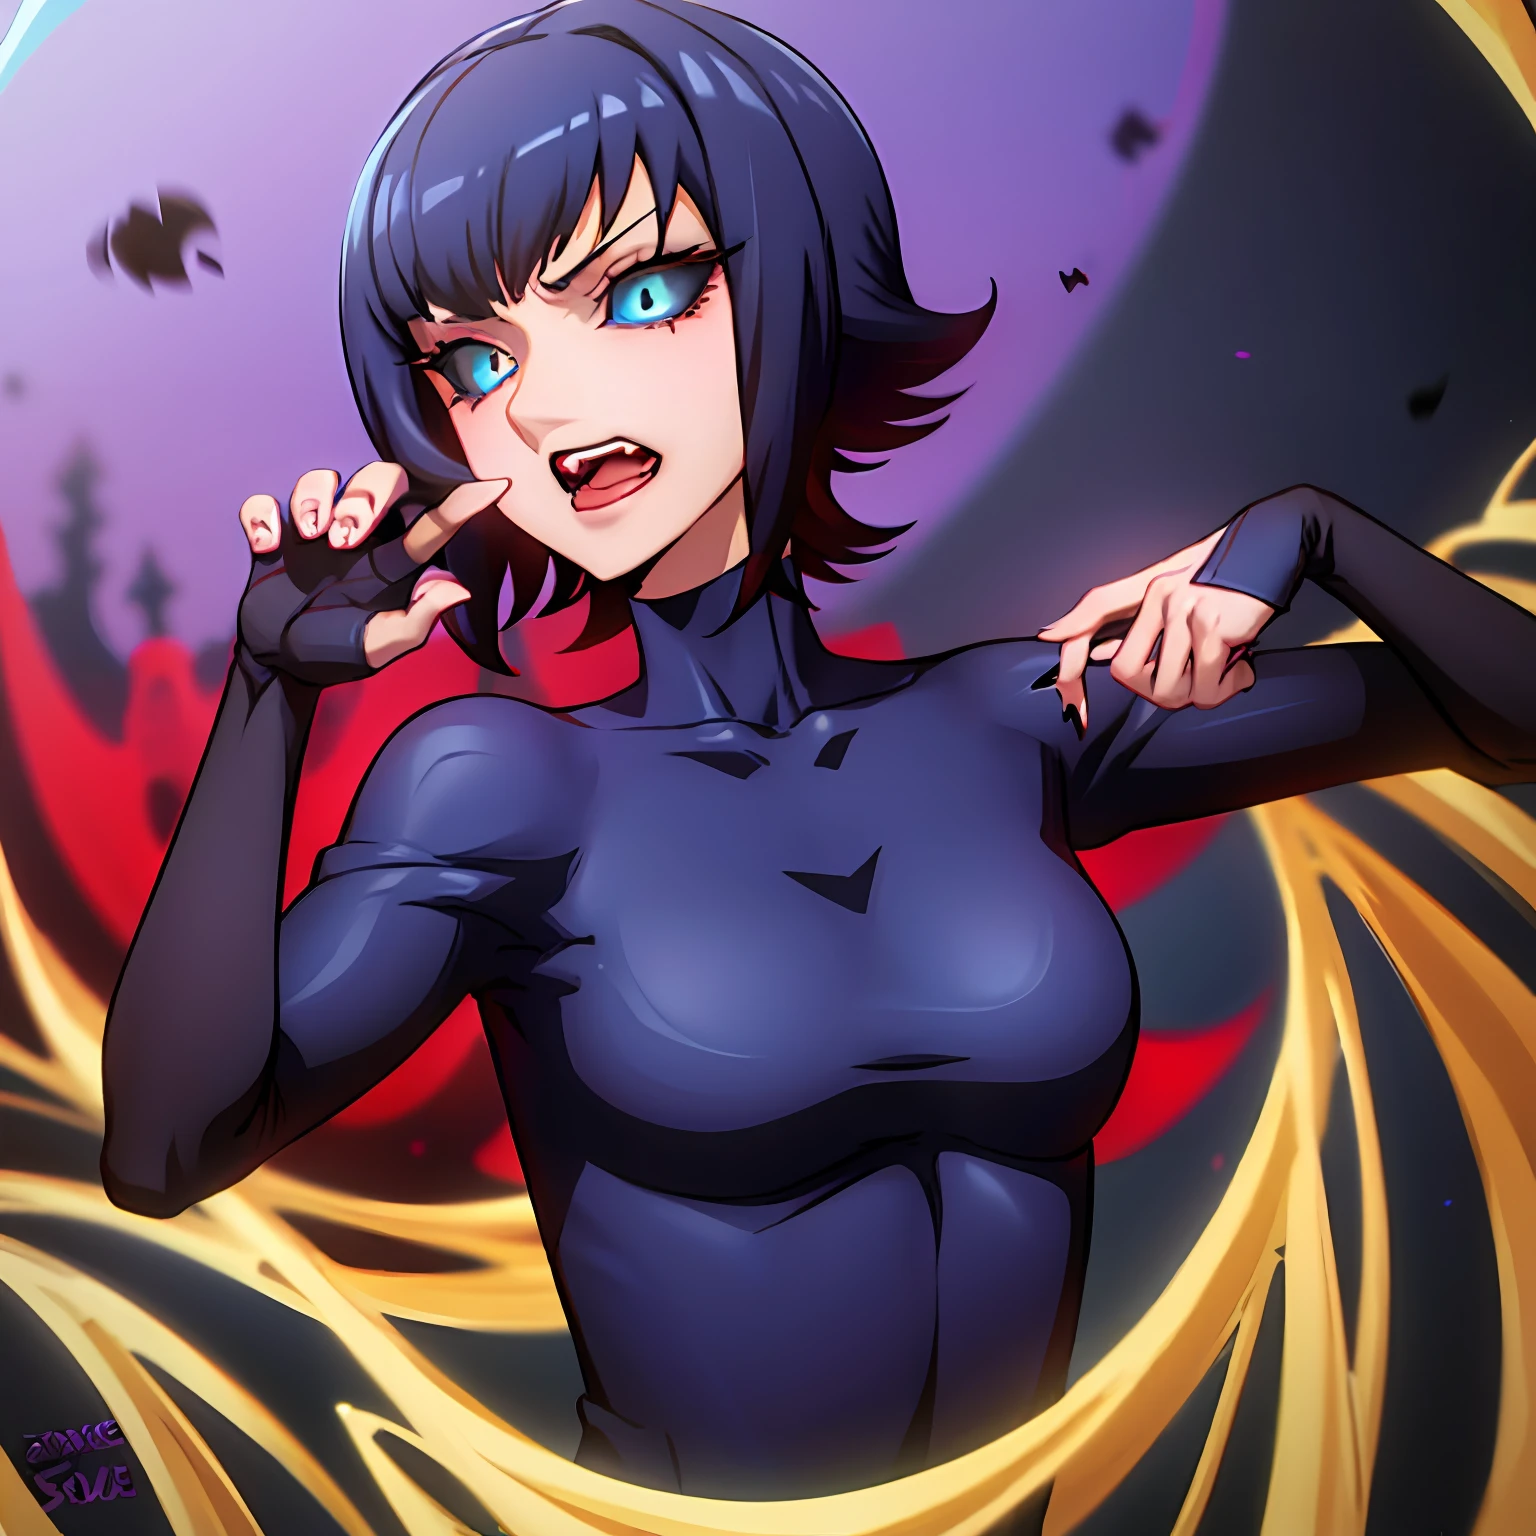 A closeup of a woman with a vampire makeup and open mouth showing her teeth while her tongue is sticking out, black sclera, blue eyes, androgynous vampire, anime vampires, 1 7 - year - old anime gothic girl, beautiful vampire queen, vampire L, female vampire, beautiful female vampire queen, today's anime featured still,  gothic horror vibes, in the anime series ergo proxy, vampire girl, vampire queen, short hair, black hair,